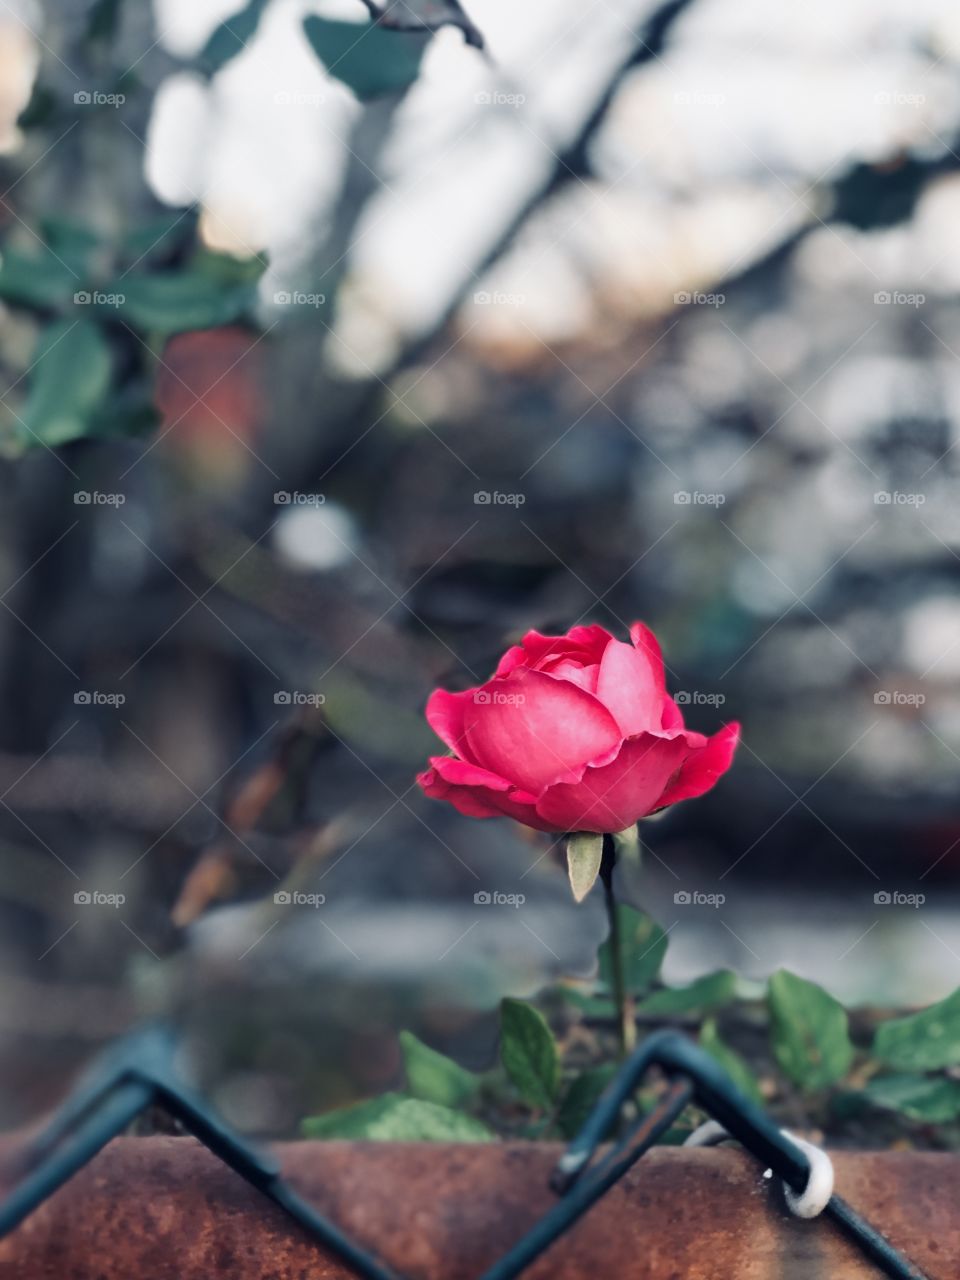 A rose growing in harsh conditions